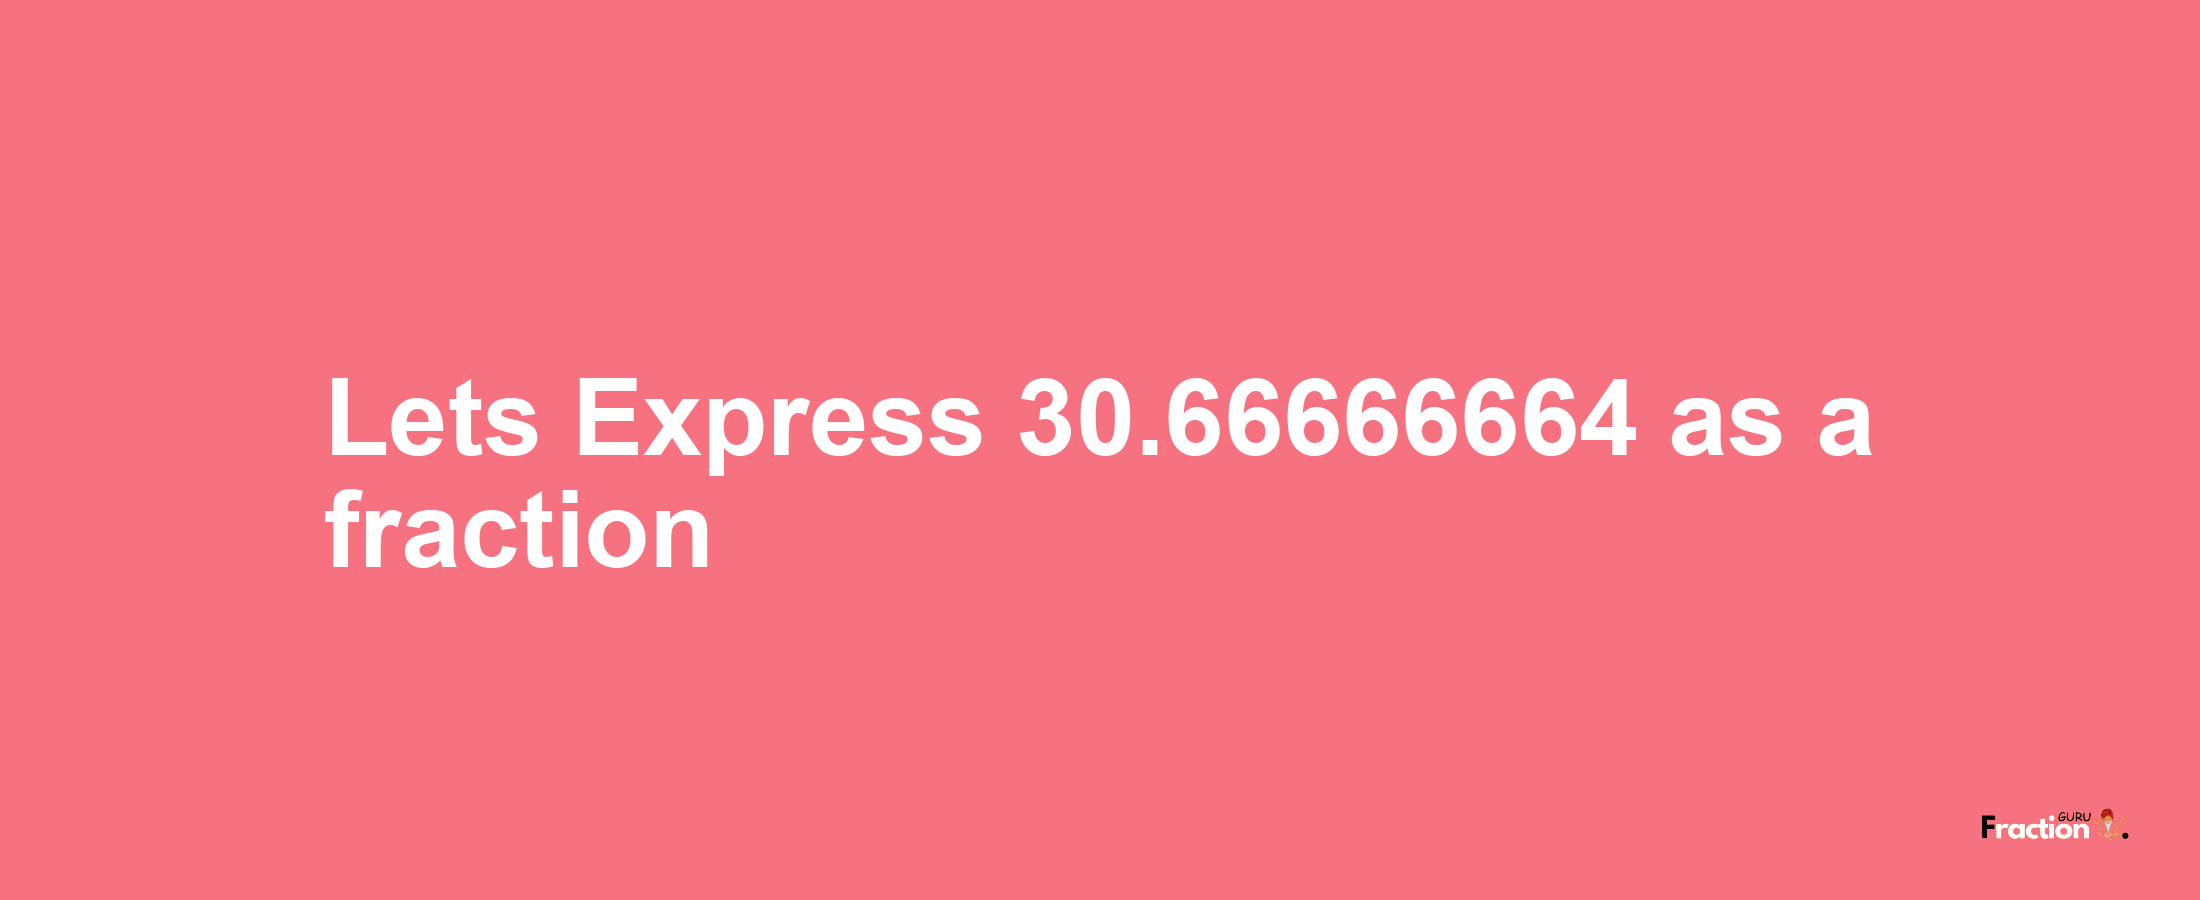 Lets Express 30.66666664 as afraction